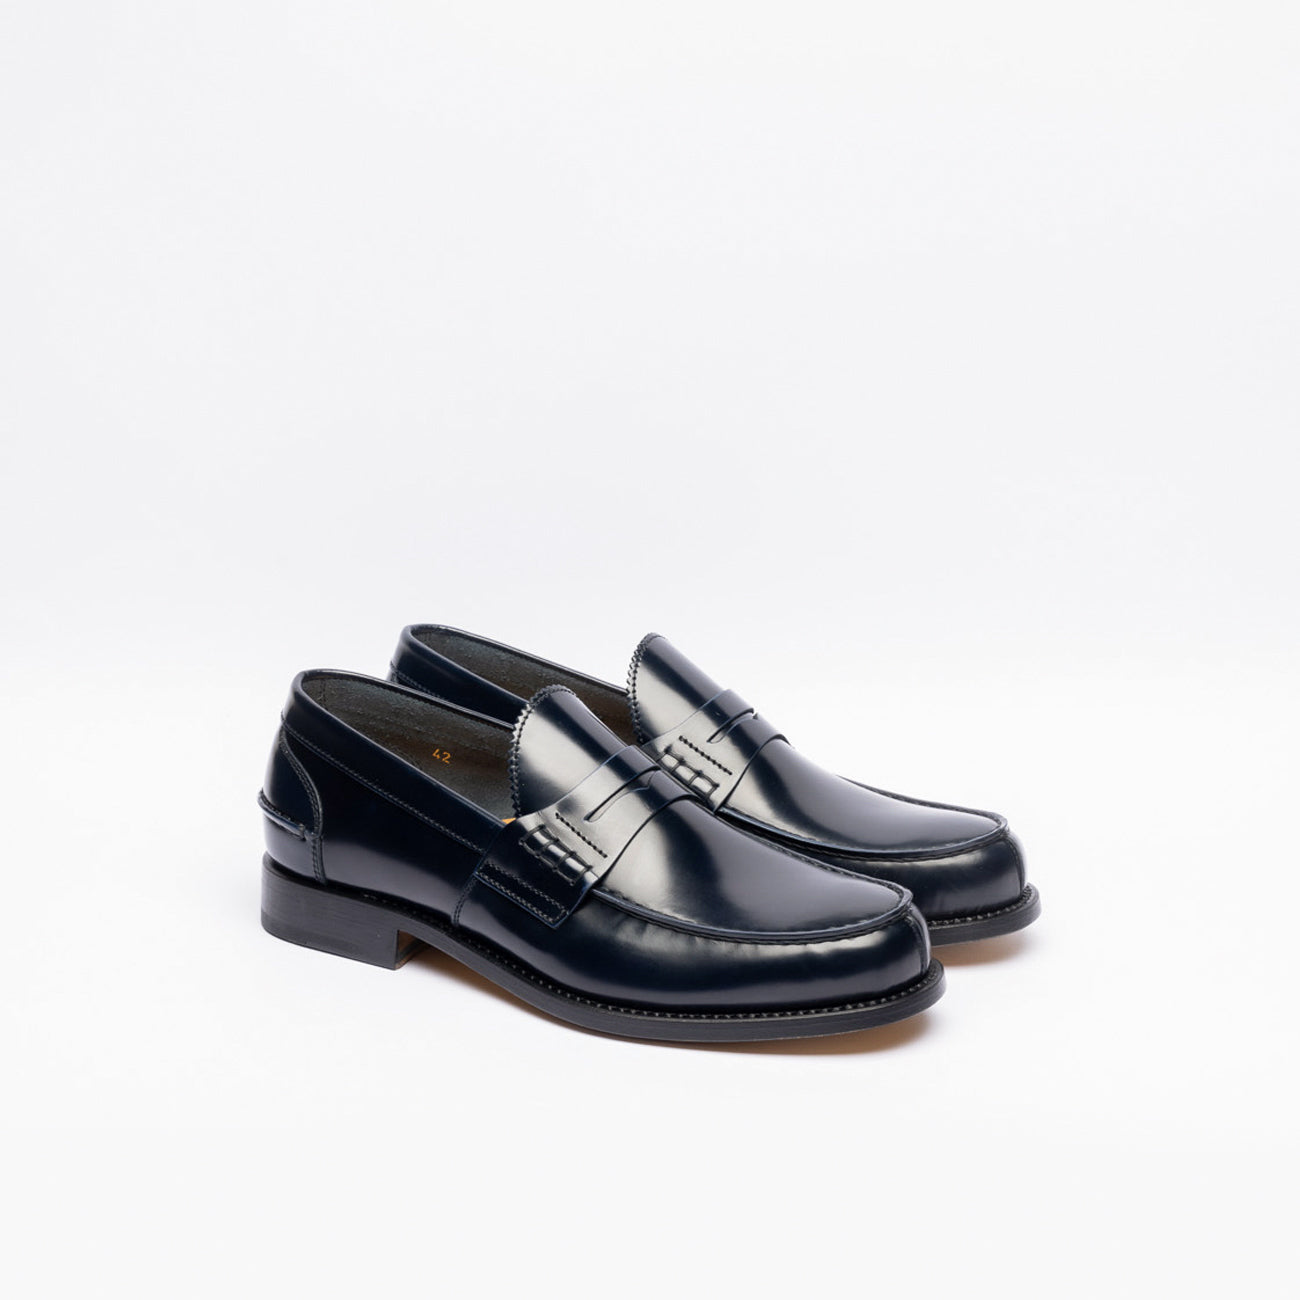  Penny loafer Borghini 750 loafer in blue brushed leather Penny loafer Borghini 750 loafer in blue brushed leather